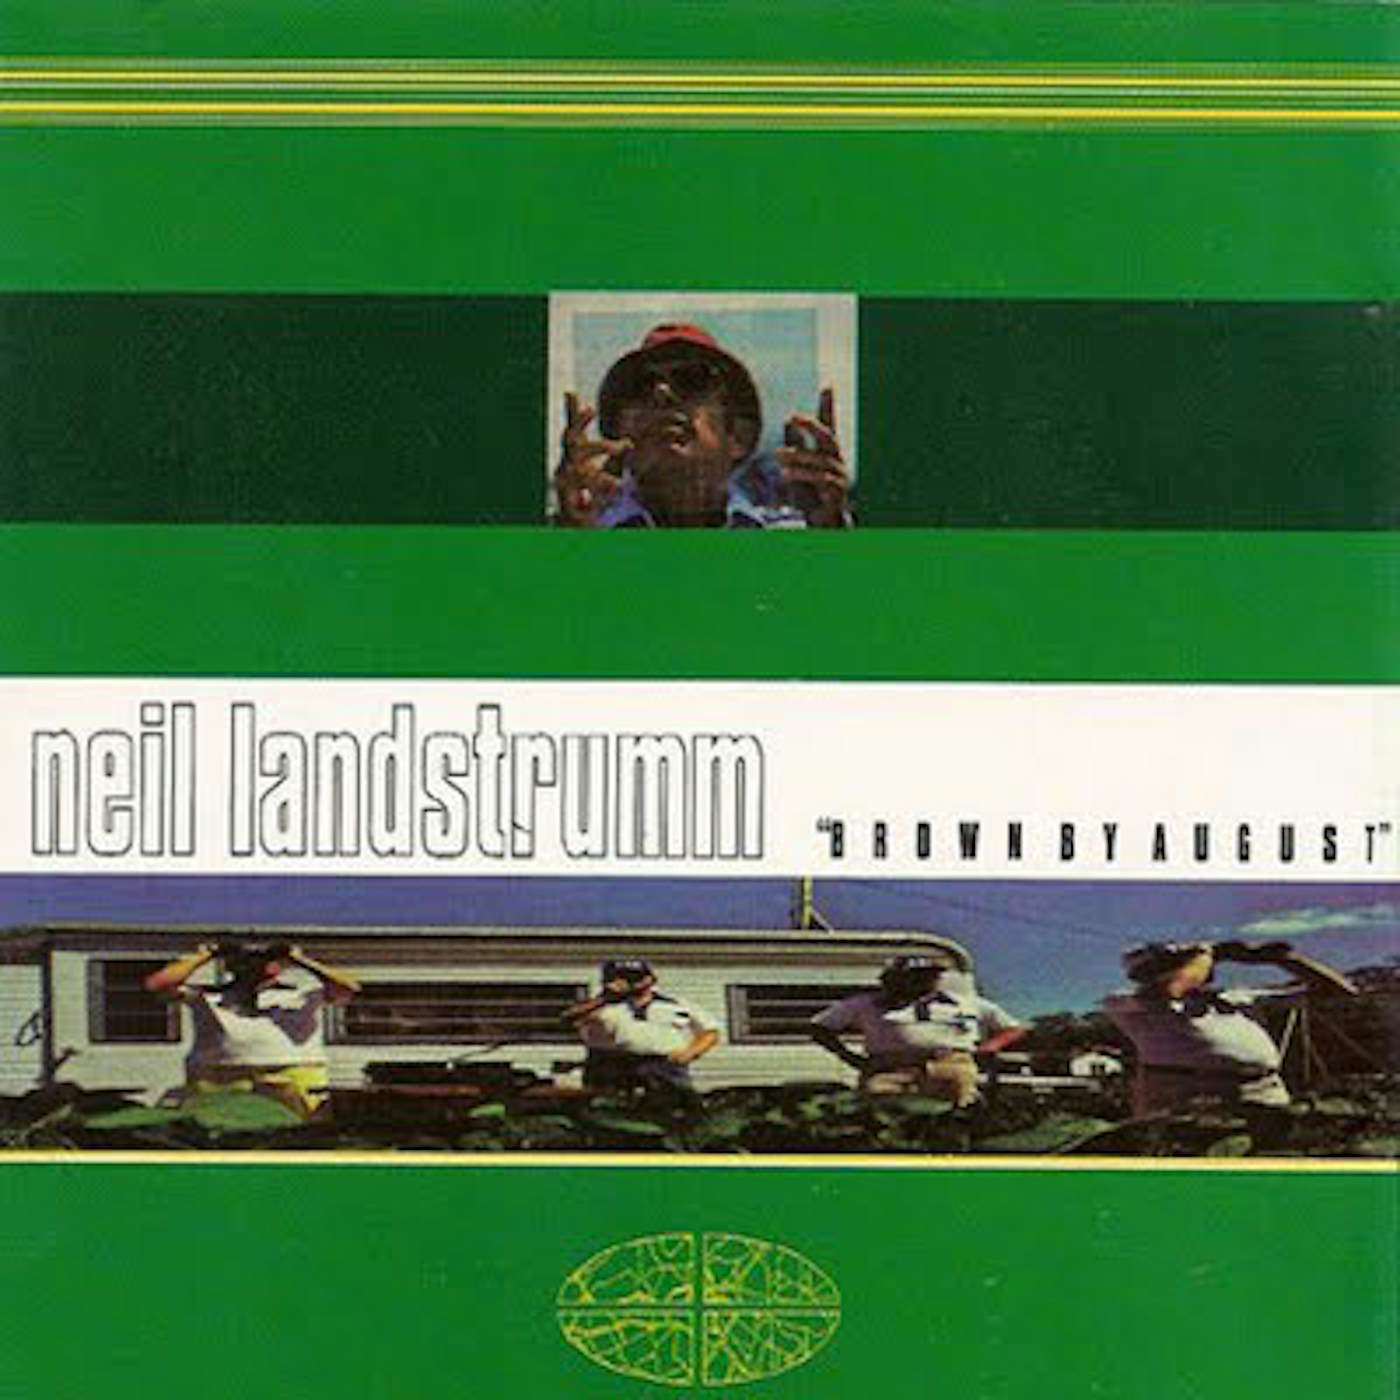 Neil Landstrumm BROWN BY AUGUST Vinyl Record - Limited Edition